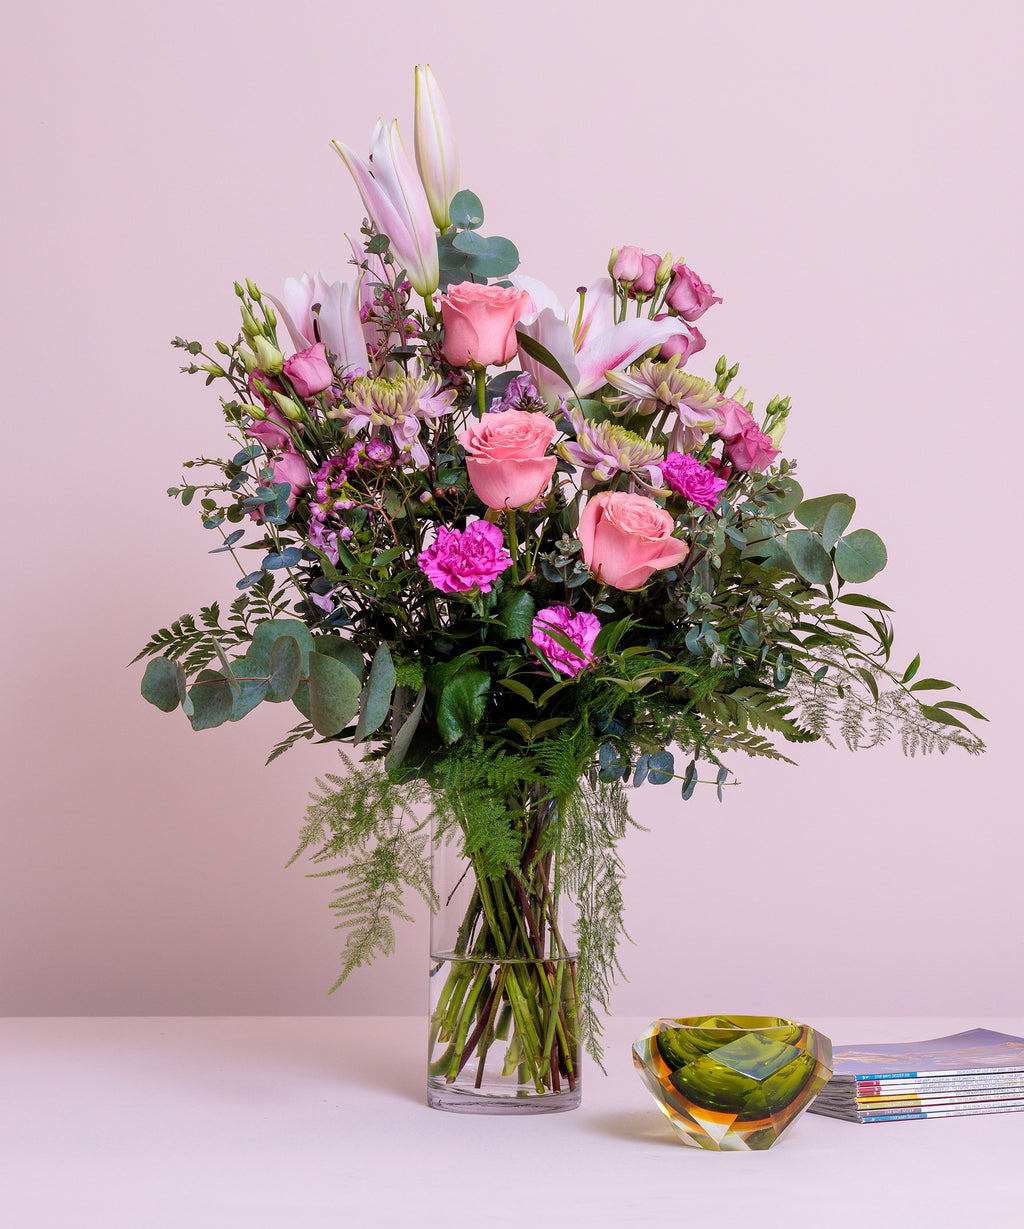 Perfect pink bouquet with lilies, roses, chrysanthemum, eucalyptus, from Lamber de Bie Flowershop in Waterford and Kilkenny and free delivery all over Ireland nationwide.